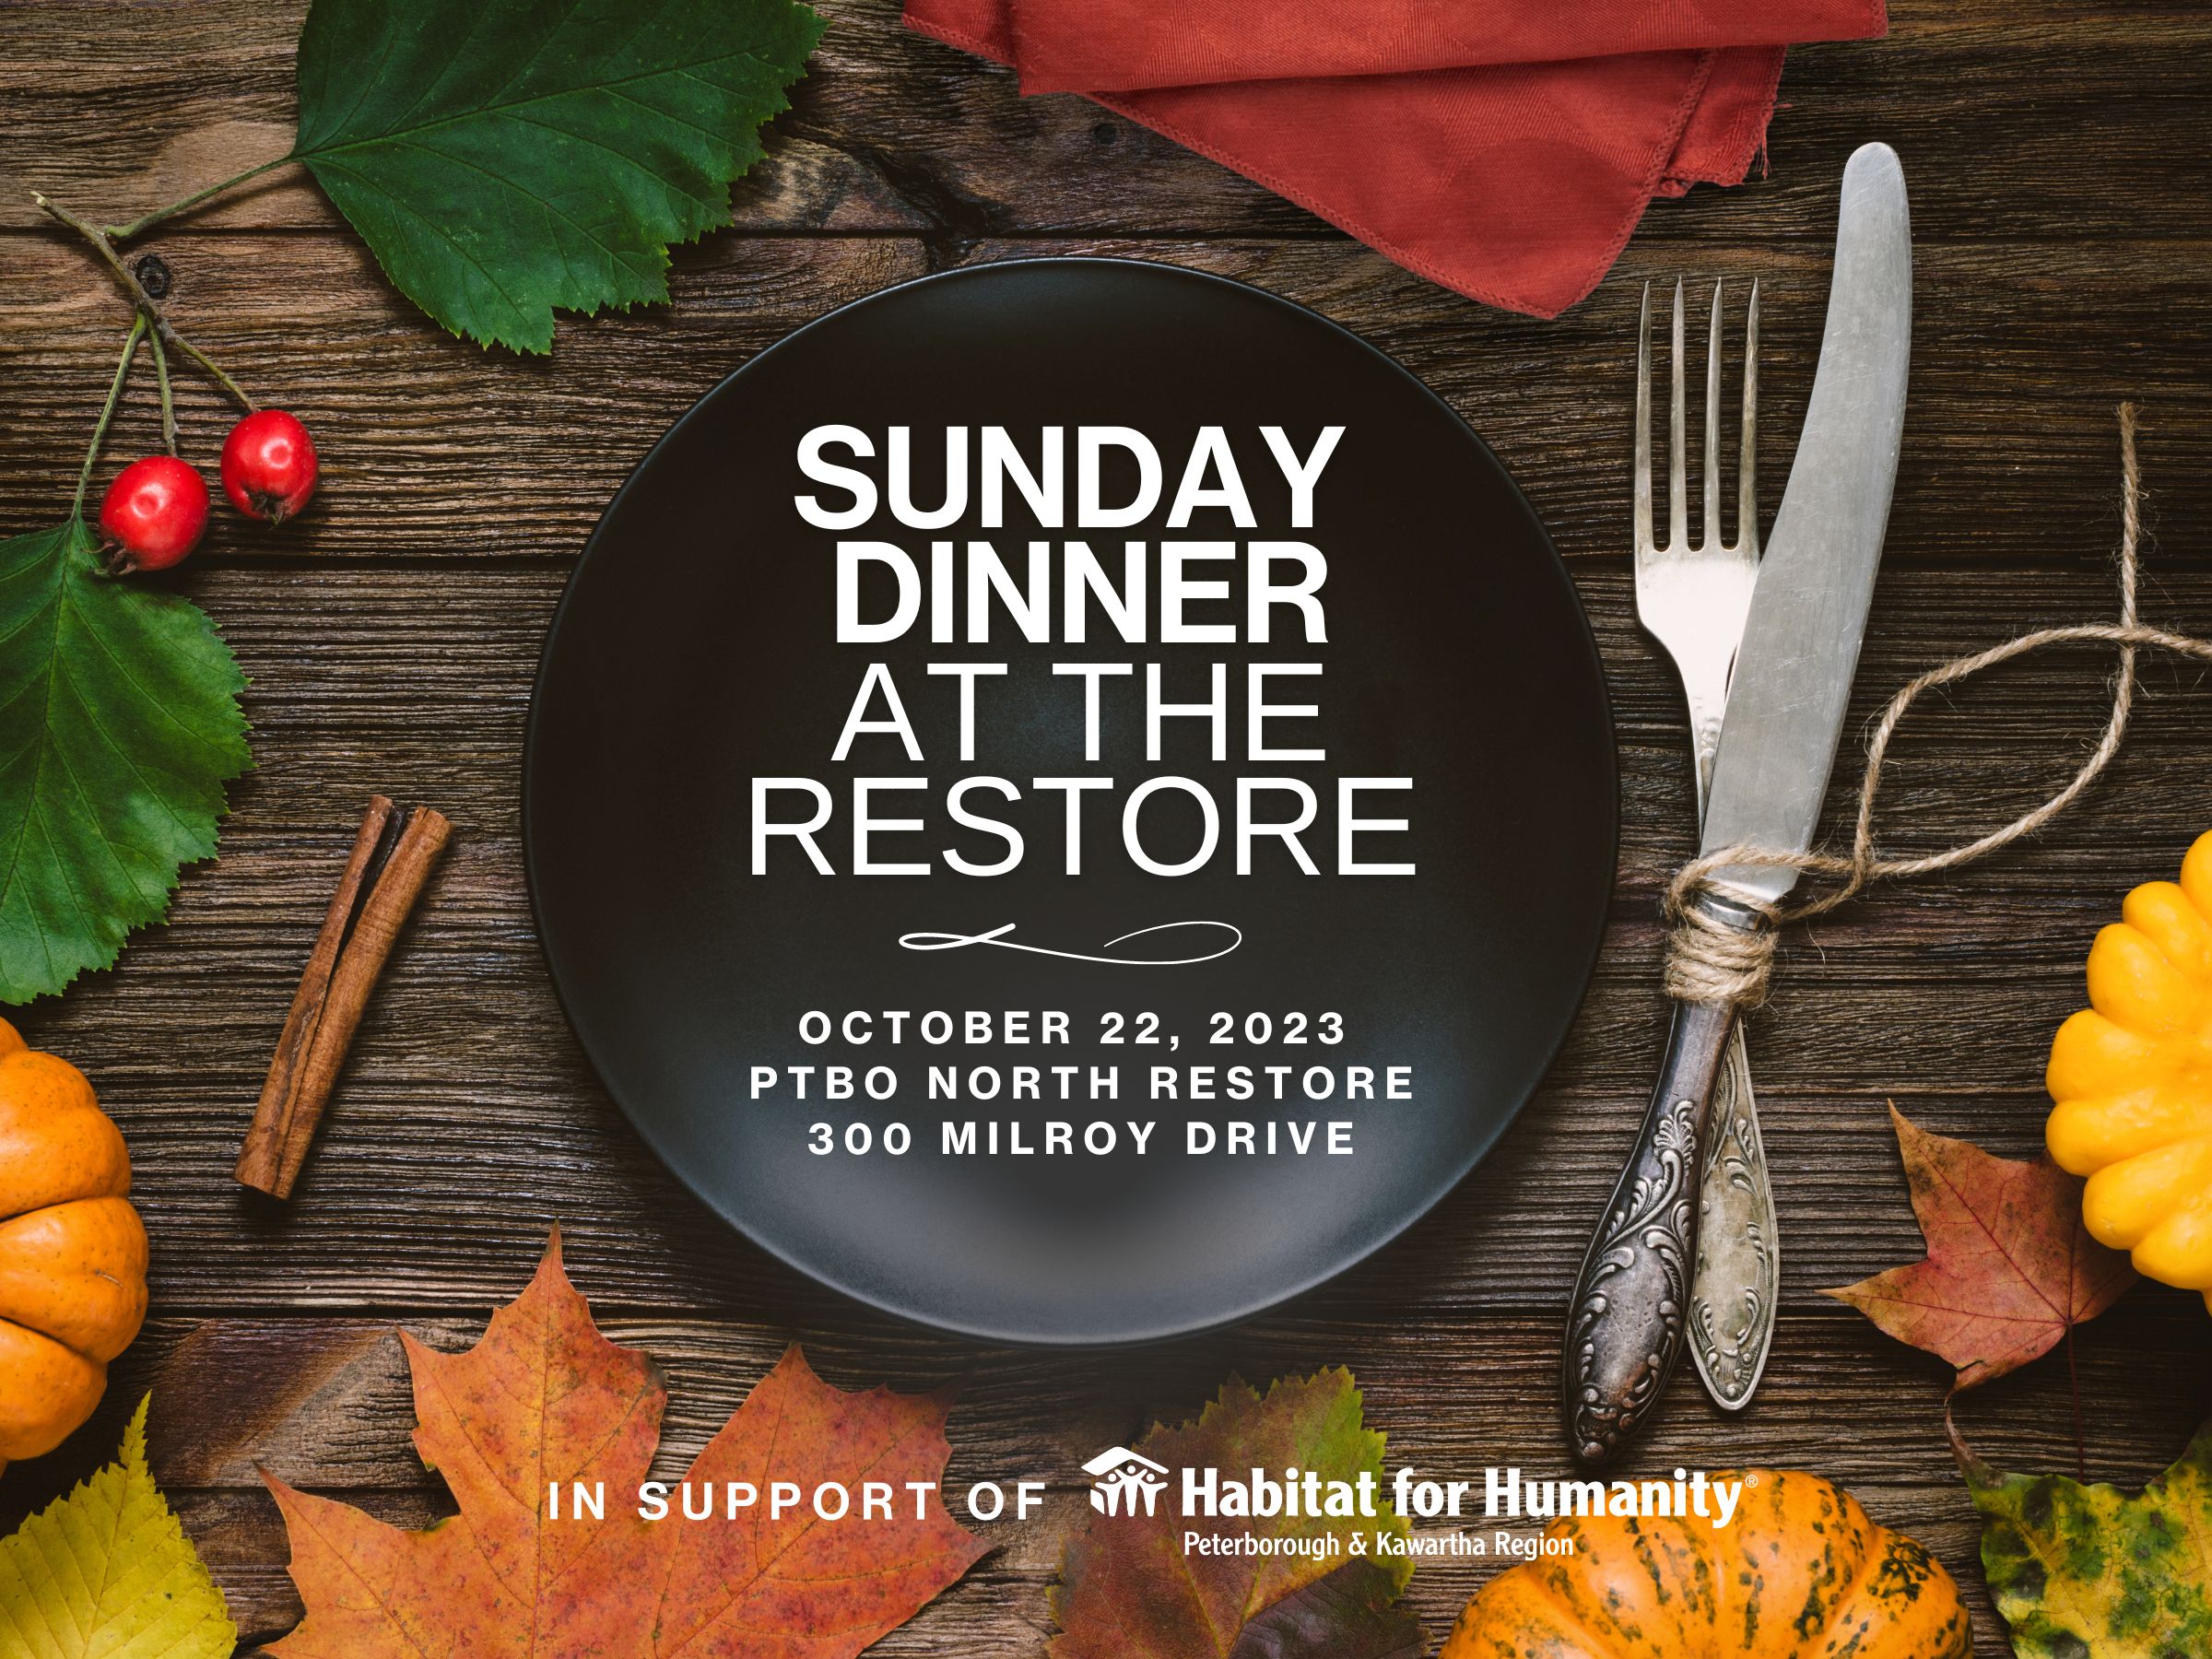 Sunday Dinner at the ReStore poster displaying a black plate on a wood table surrounded by fall leaves and pumpkins.